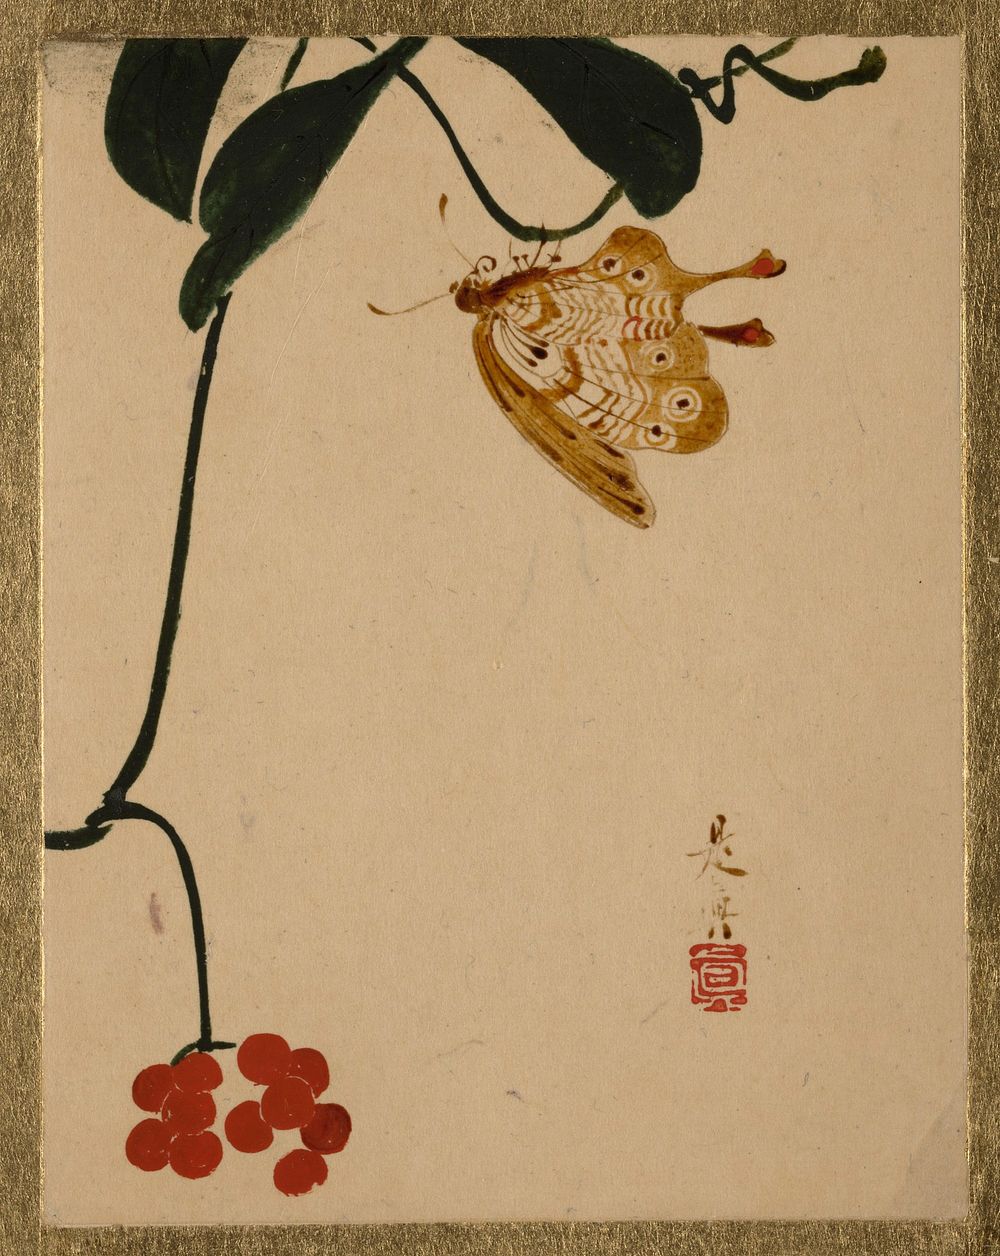 Red Berry Plant and Butterfly. Original public domain image from the MET museum.